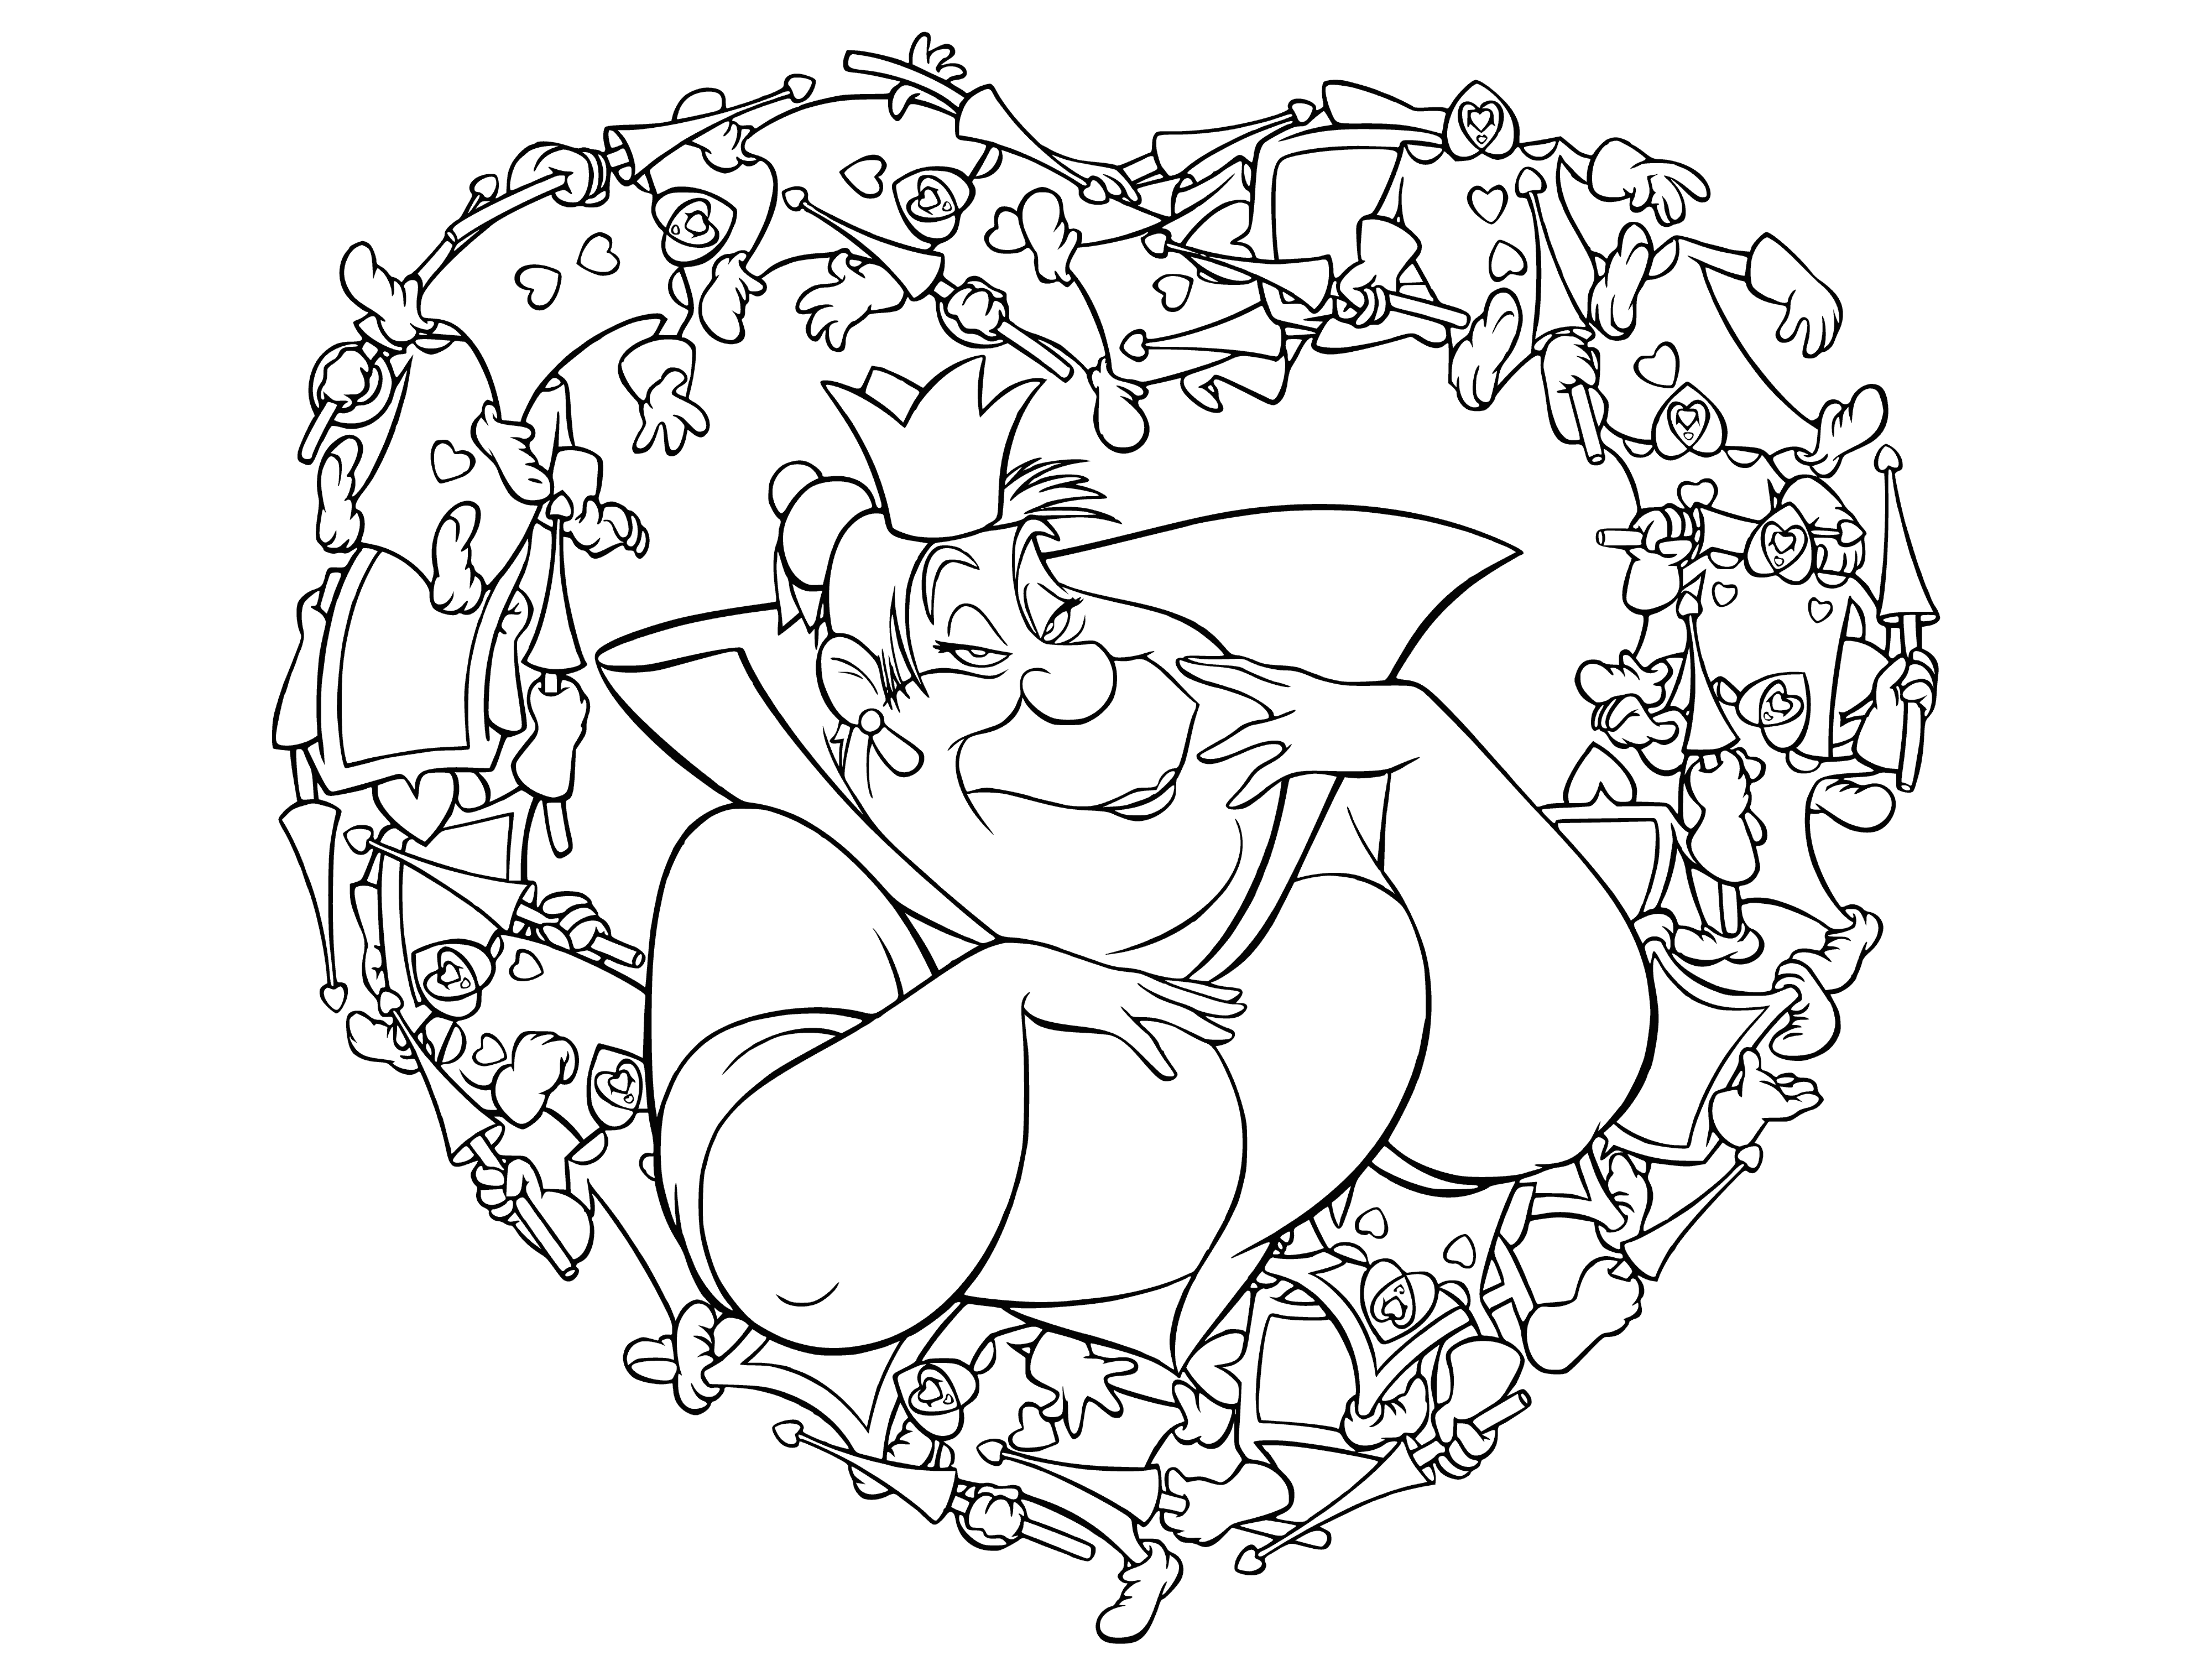 coloring page: A big heart crowned by gold at the center, with smaller hearts and a throne in the background. #love